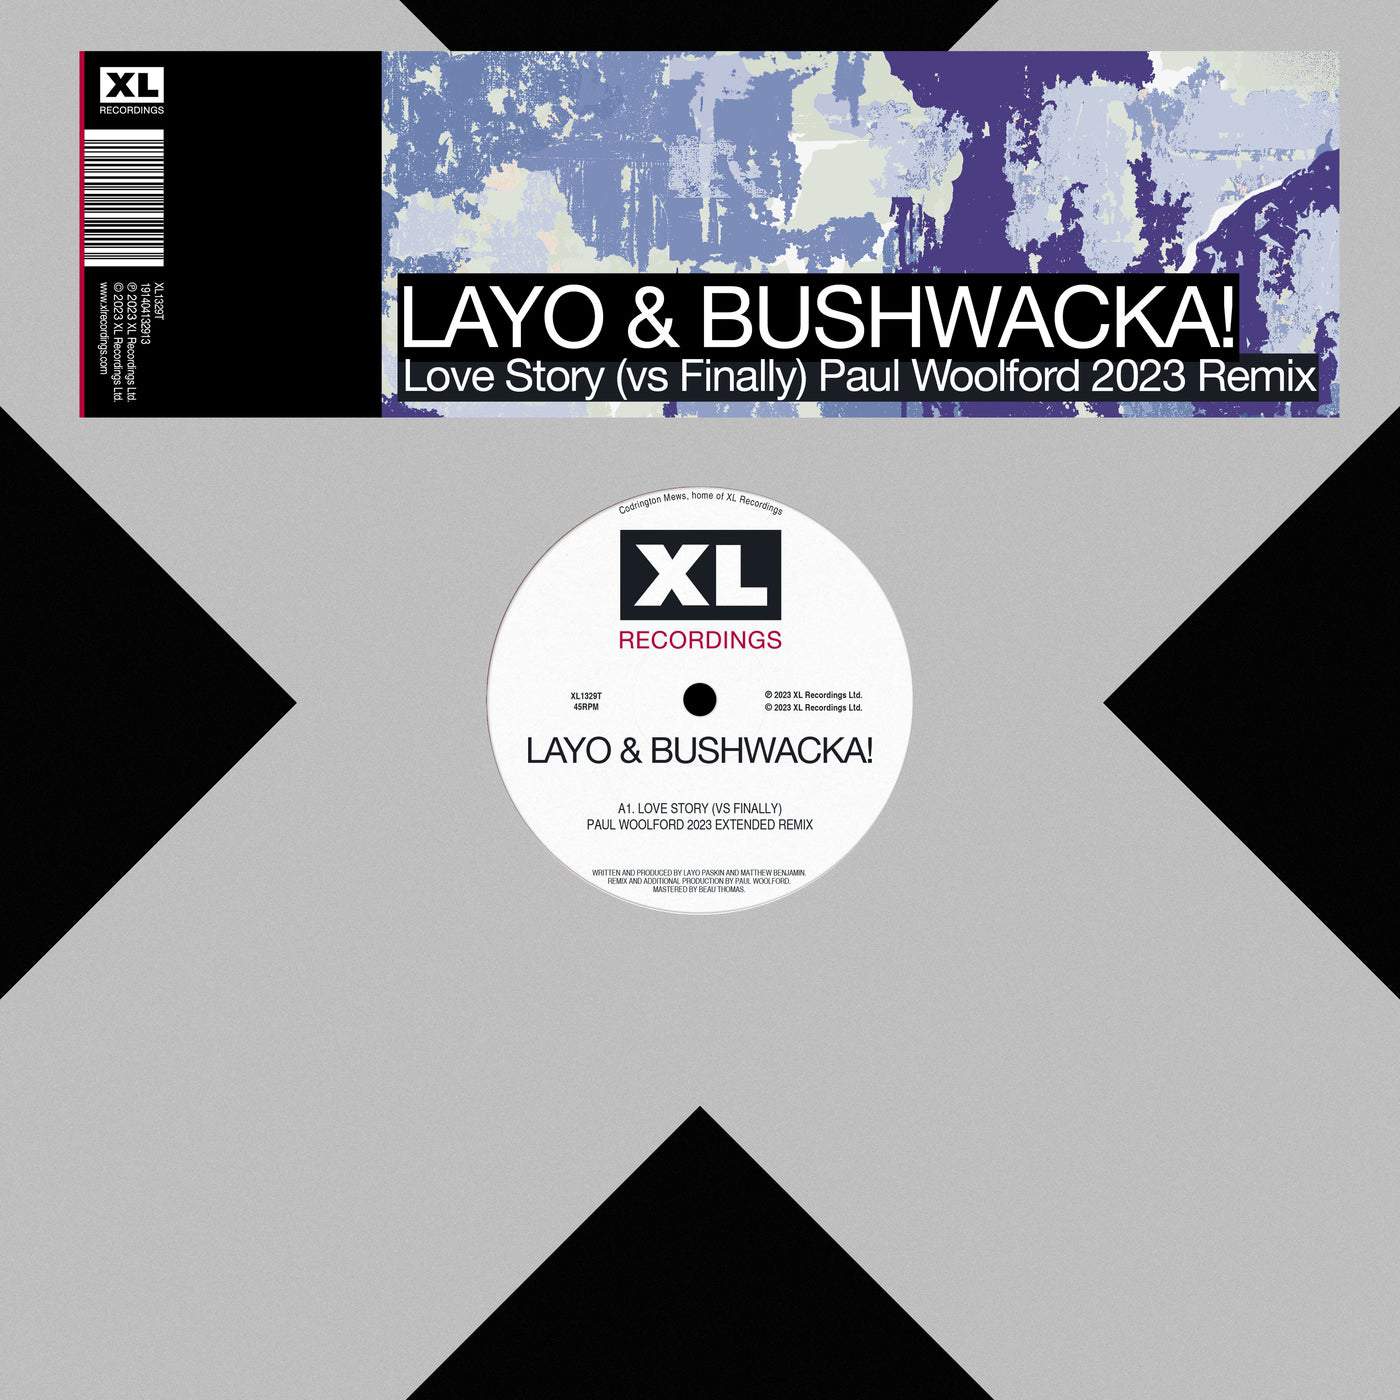 Download Layo & Bushwacka!, Paul Woolford - Love Story (vs Finally) - Paul Woolford 2023 Extended Remix on Electrobuzz